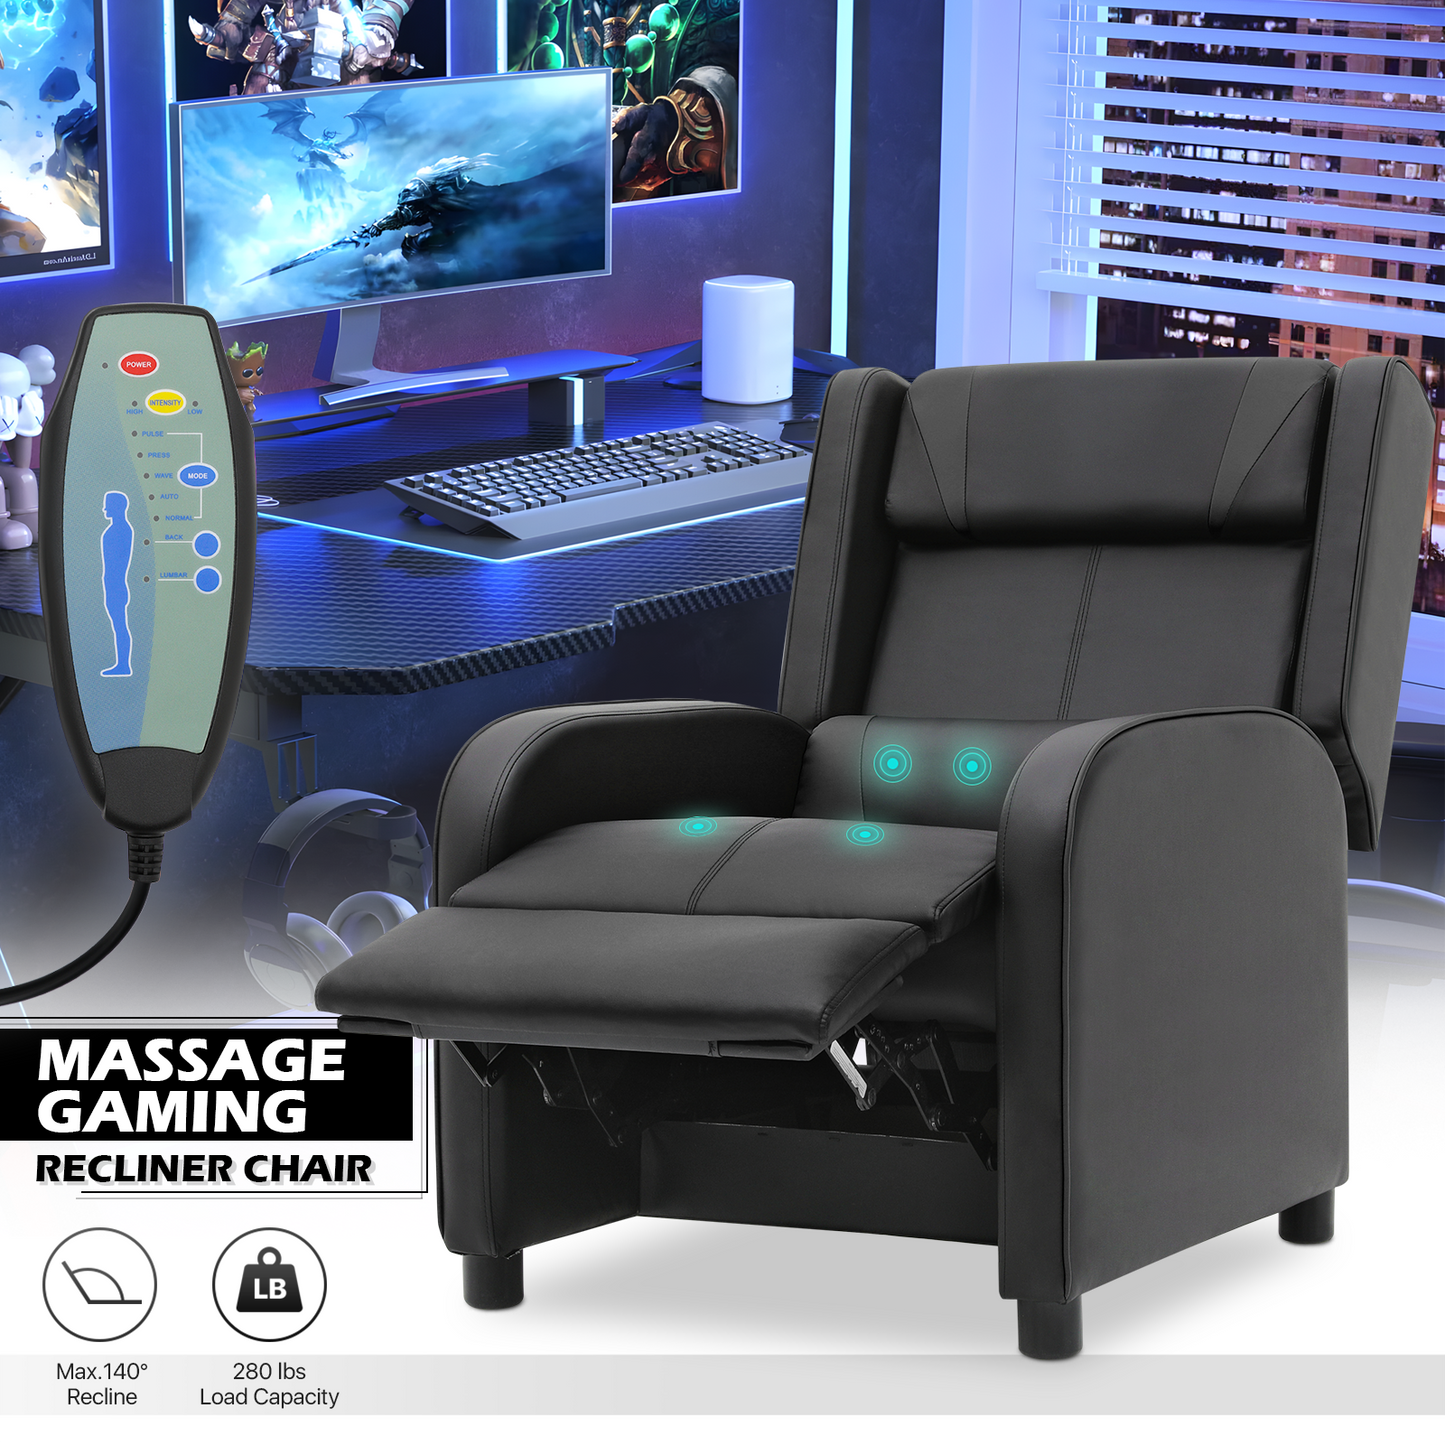 MoNiBloom Gaming Chair Recliner Ergonomic Reclining Game Chair Bedroom  Single Sofa Video Game Couch PU Leather Theater Seating with Cup Holder for  RV